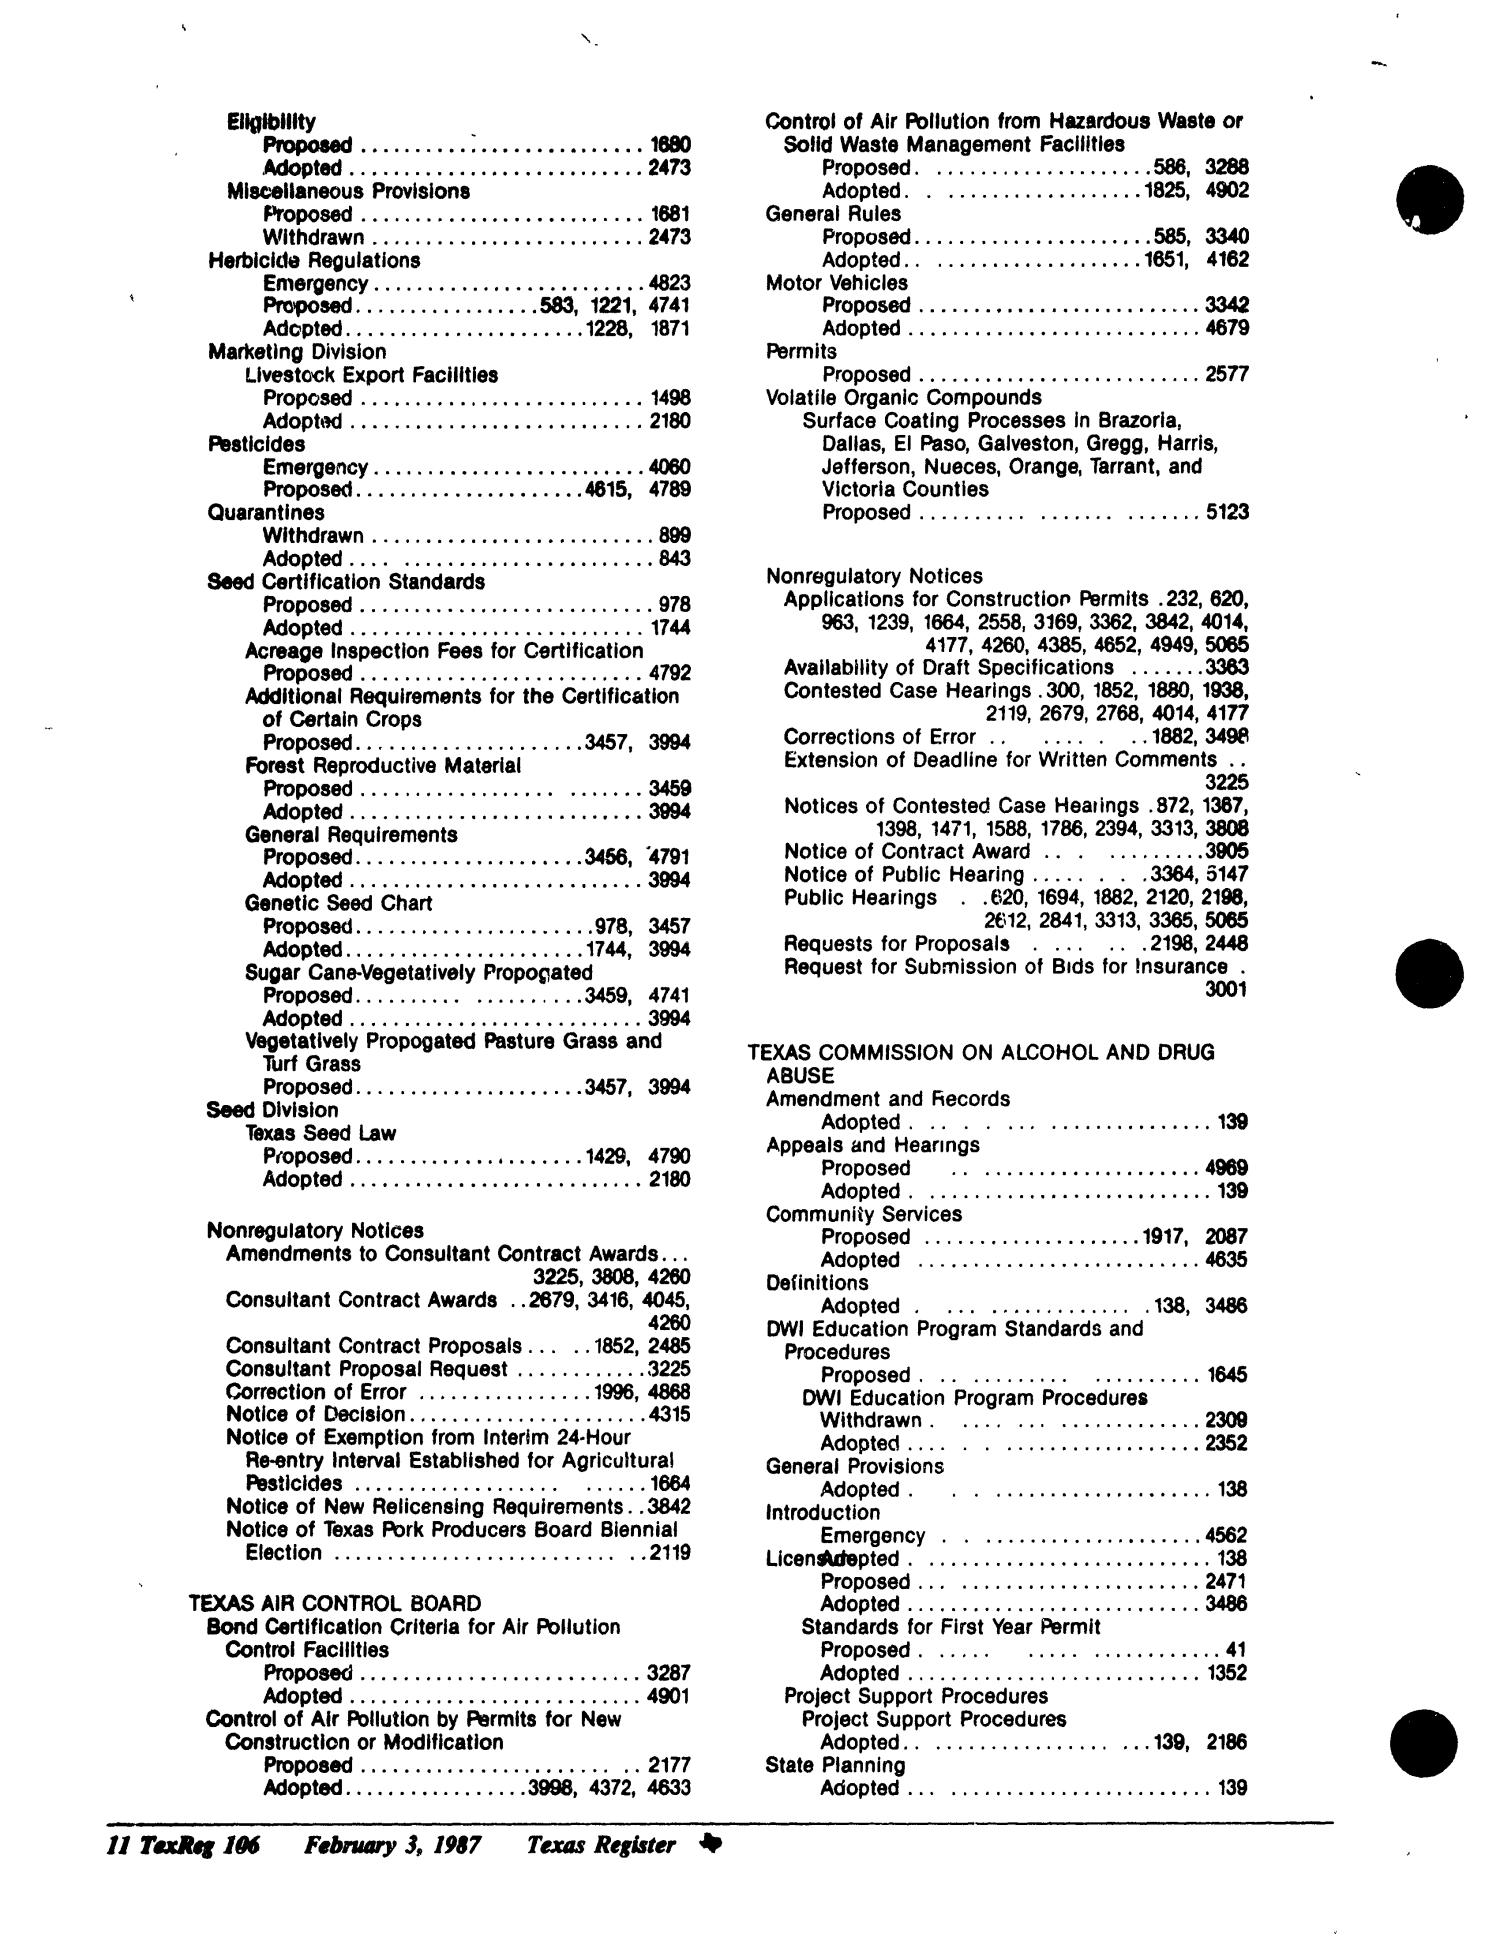 Texas Register: Annual Index January - December 1986, Volume 11 Numbers [1-96] - pages 104-157, February 3, 1987
                                                
                                                    106
                                                